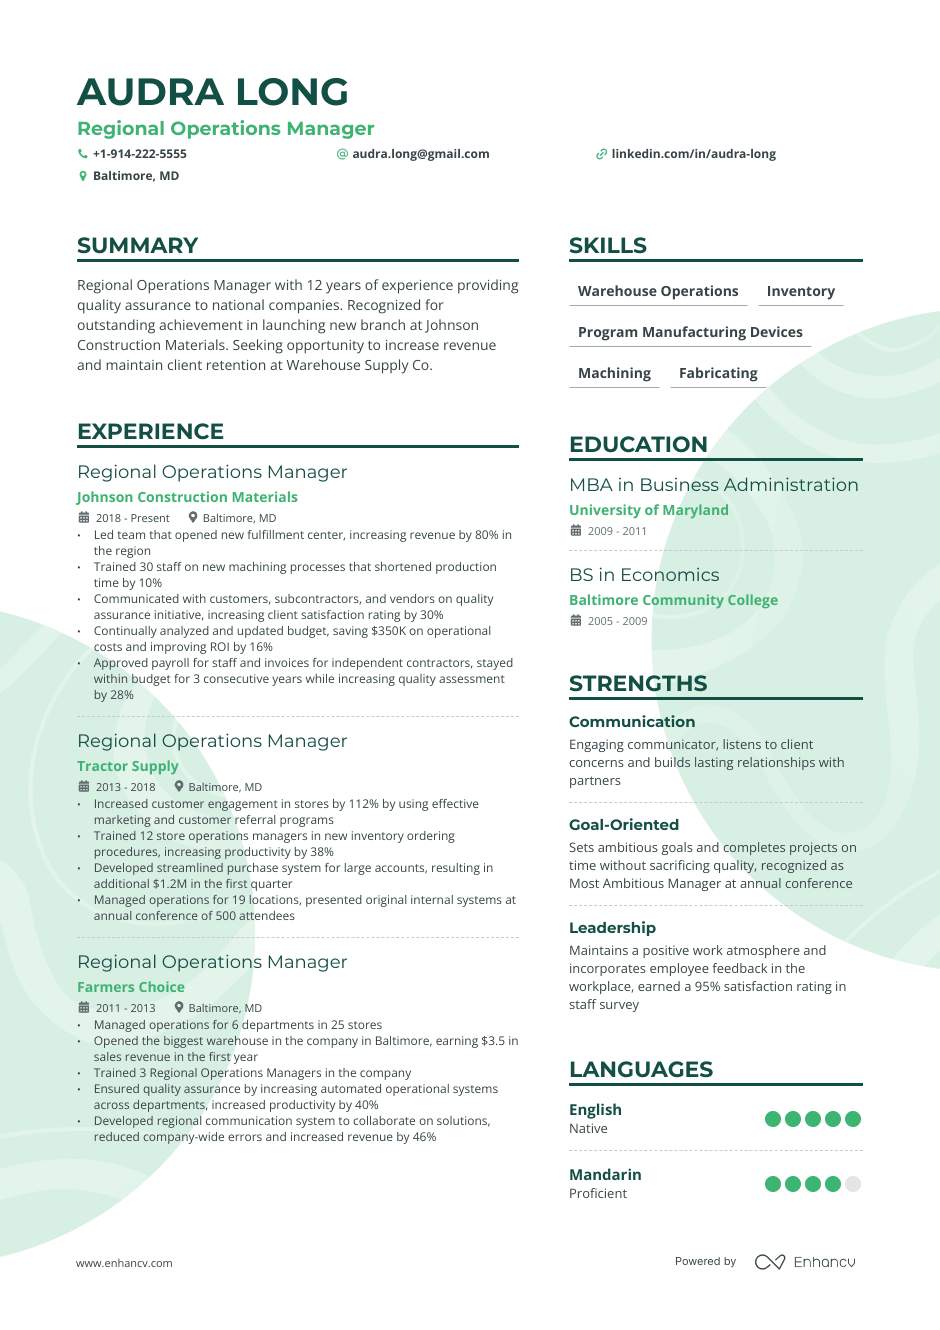 Regional operations manager resume example